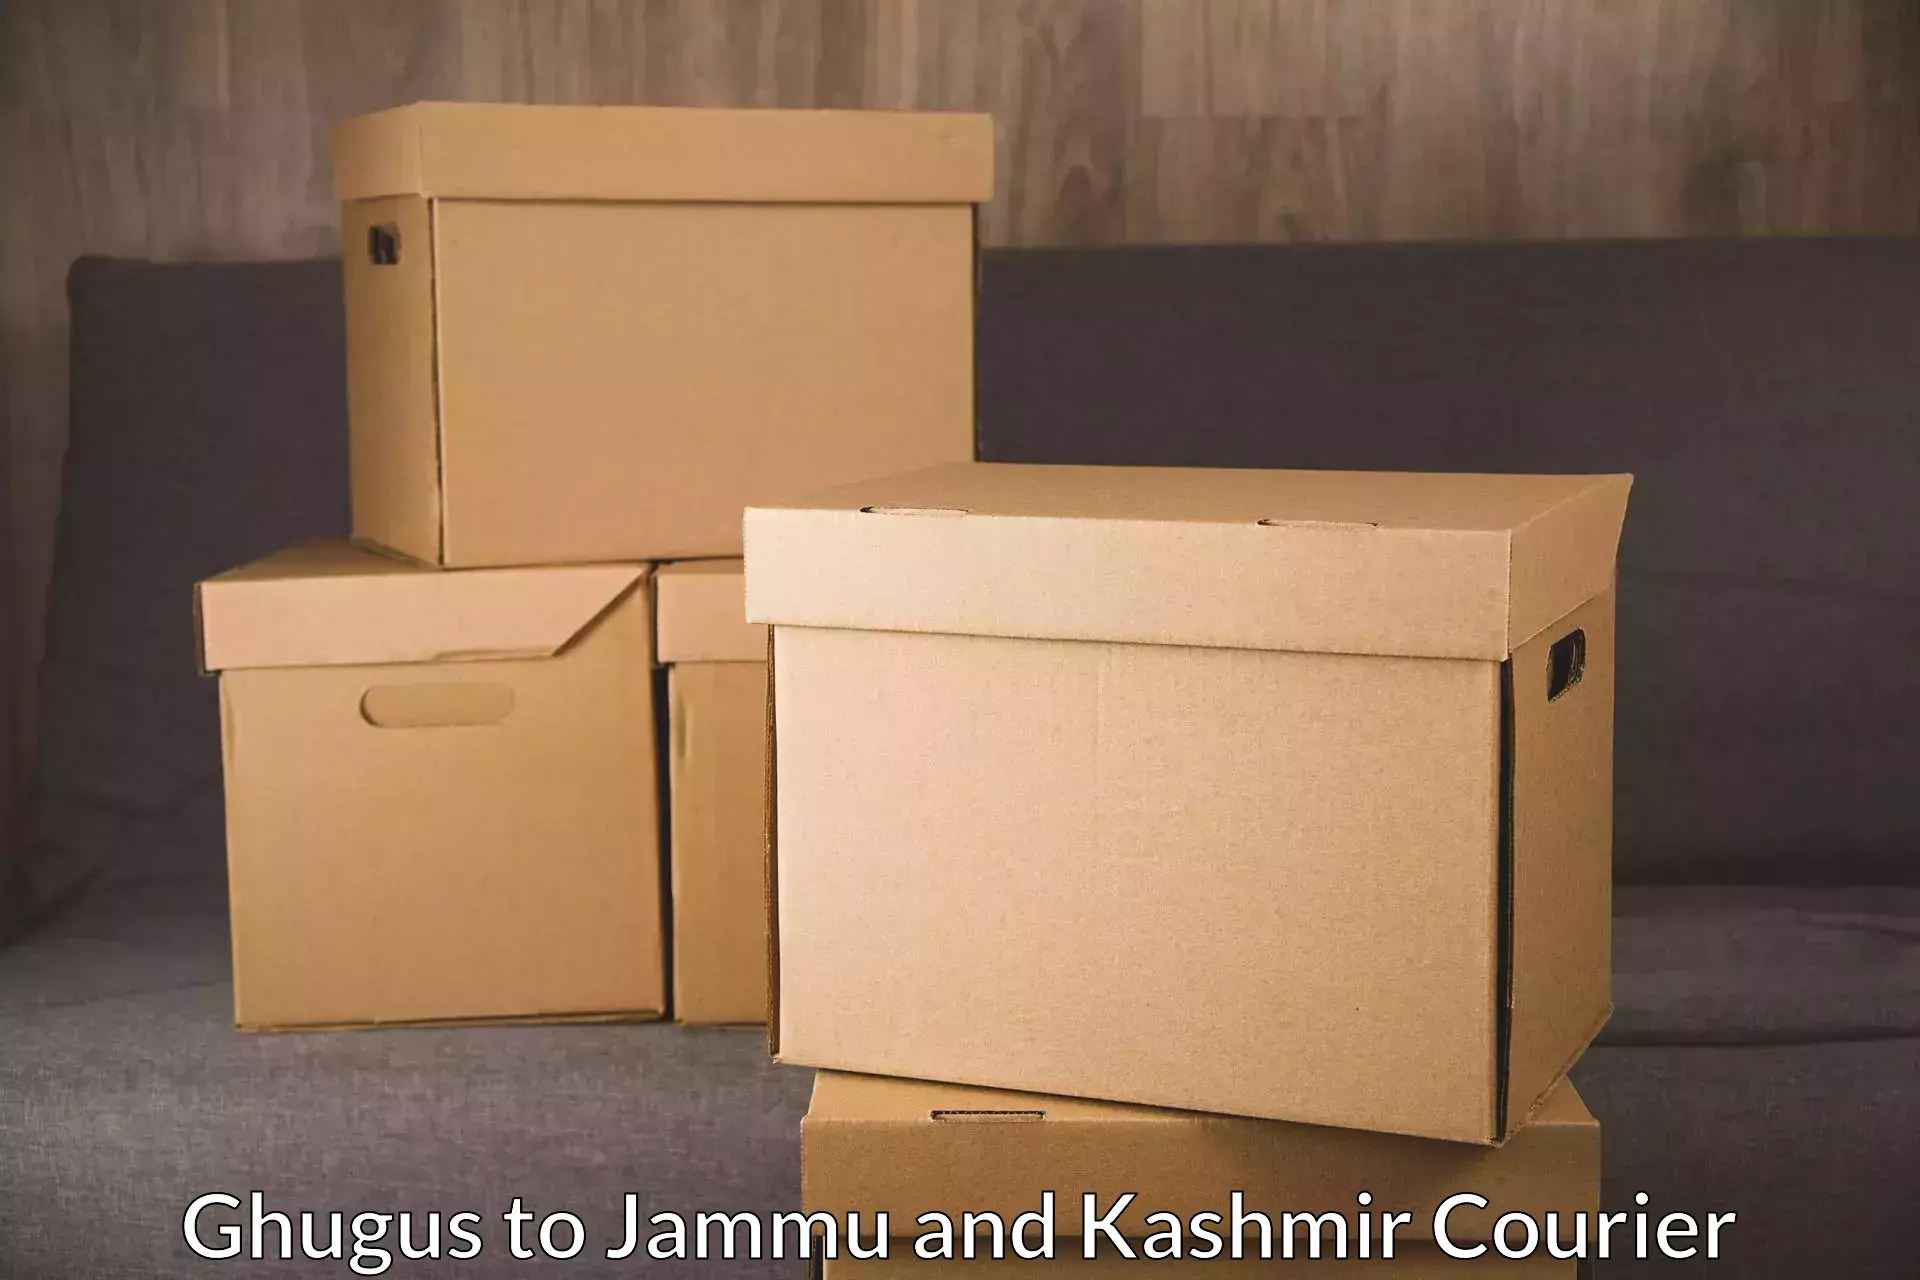 Nationwide shipping coverage Ghugus to Jammu and Kashmir